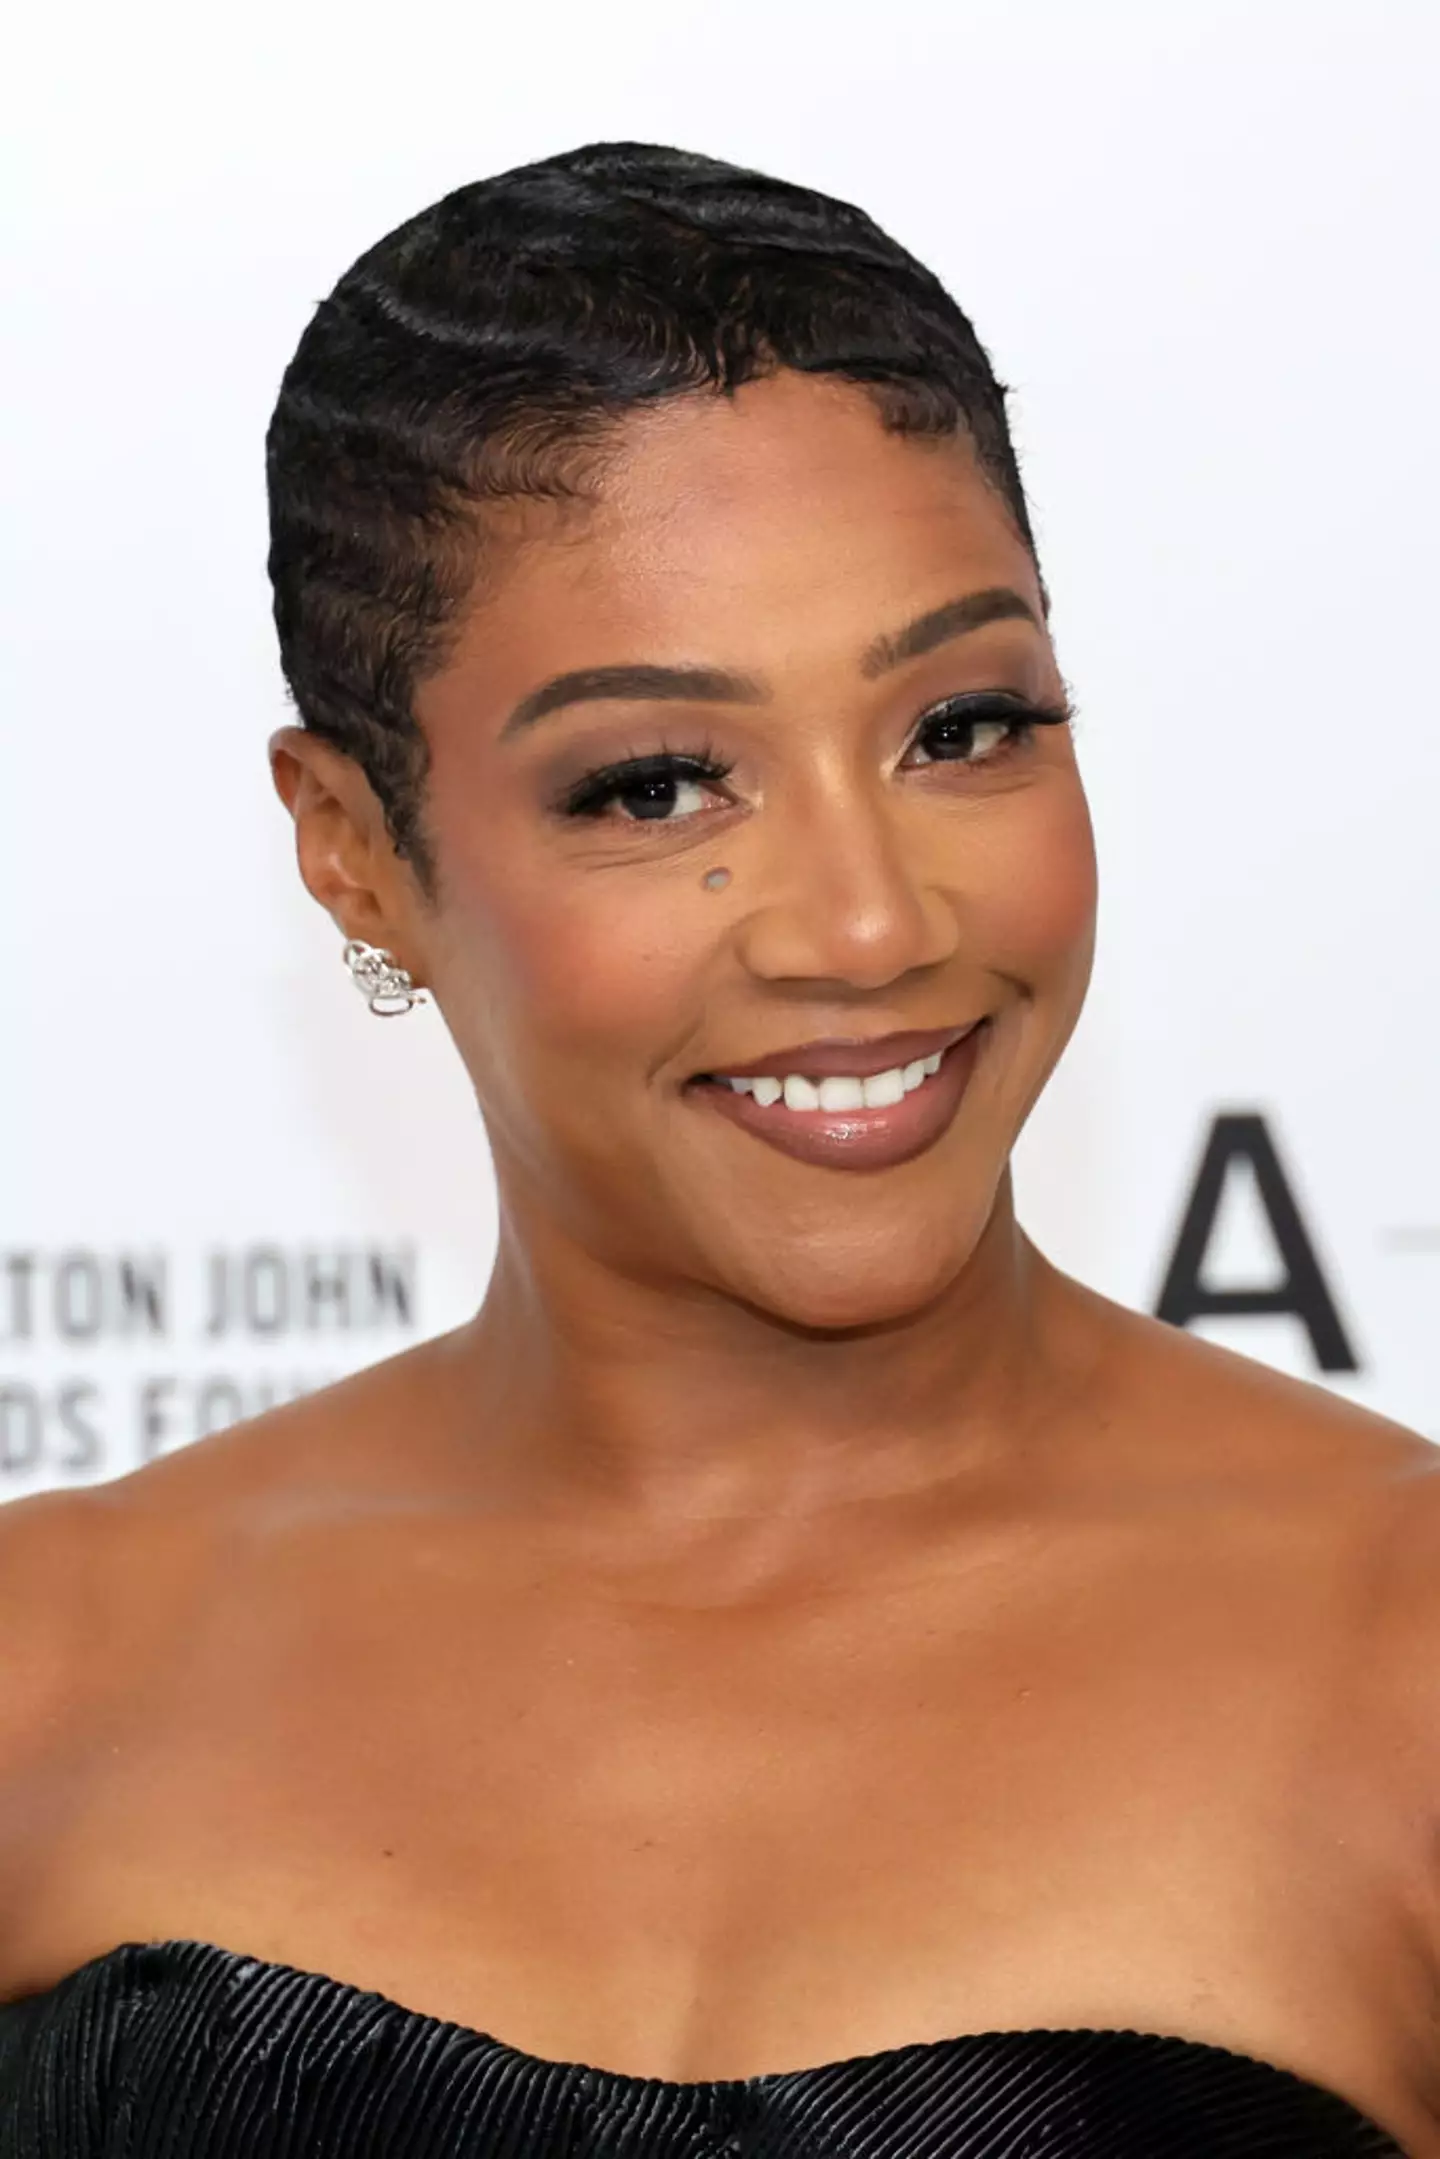 The Girls Trip star has had eight miscarriages in total. (Dia Dipasupil / Staff / Getty Images)